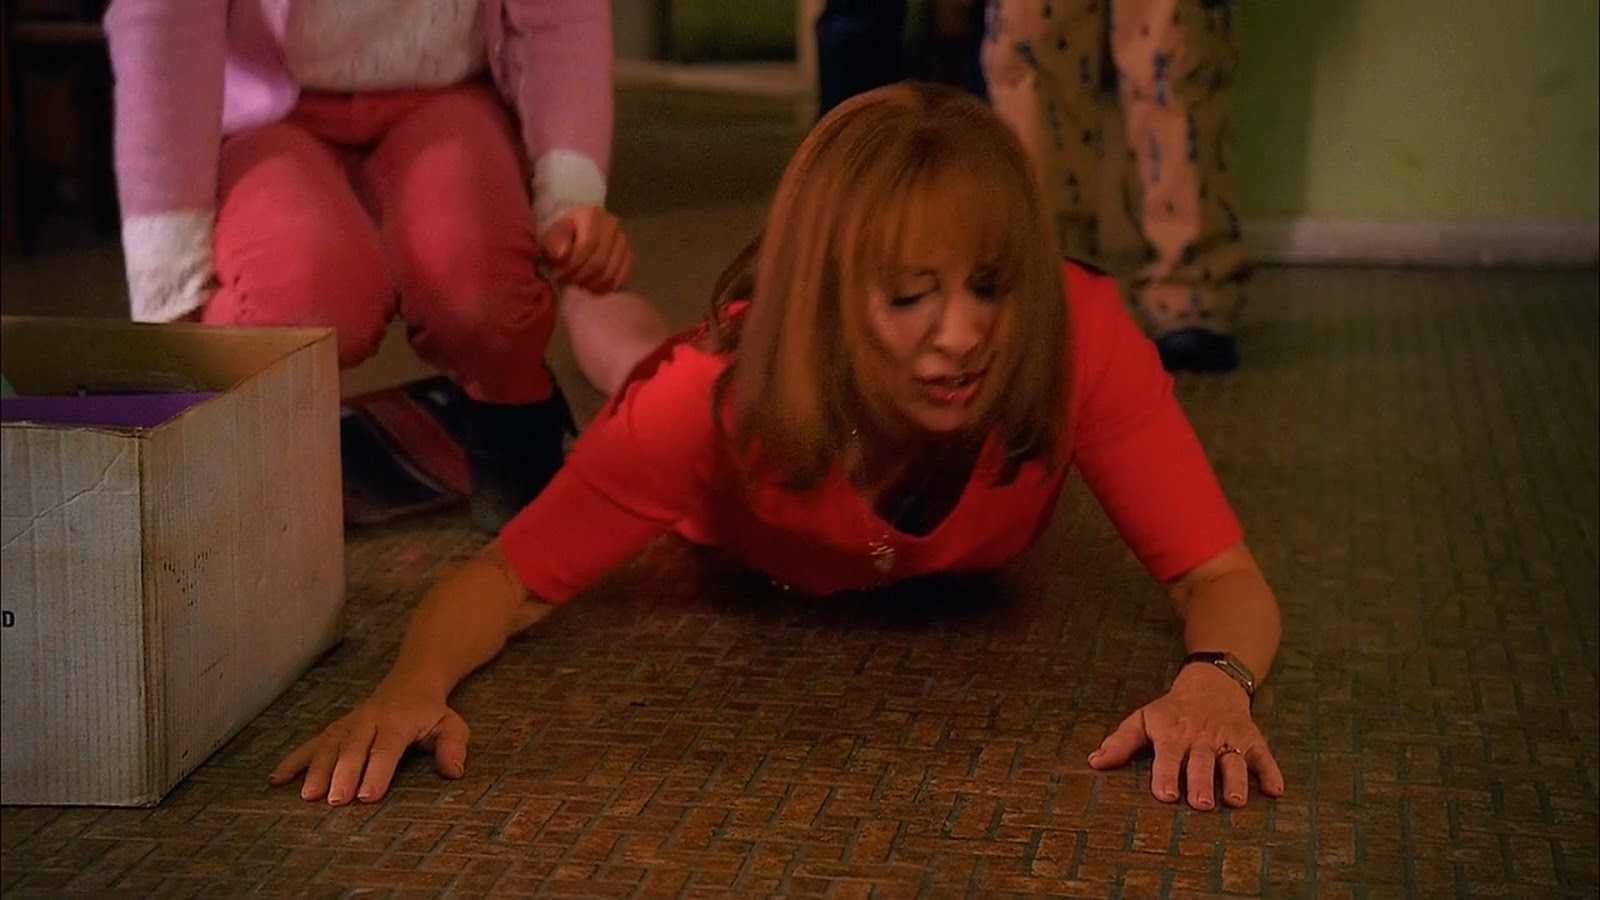 Sausages Celebs: Patricia Heaton - The Middle S07Ep10 leggy, top of tights.